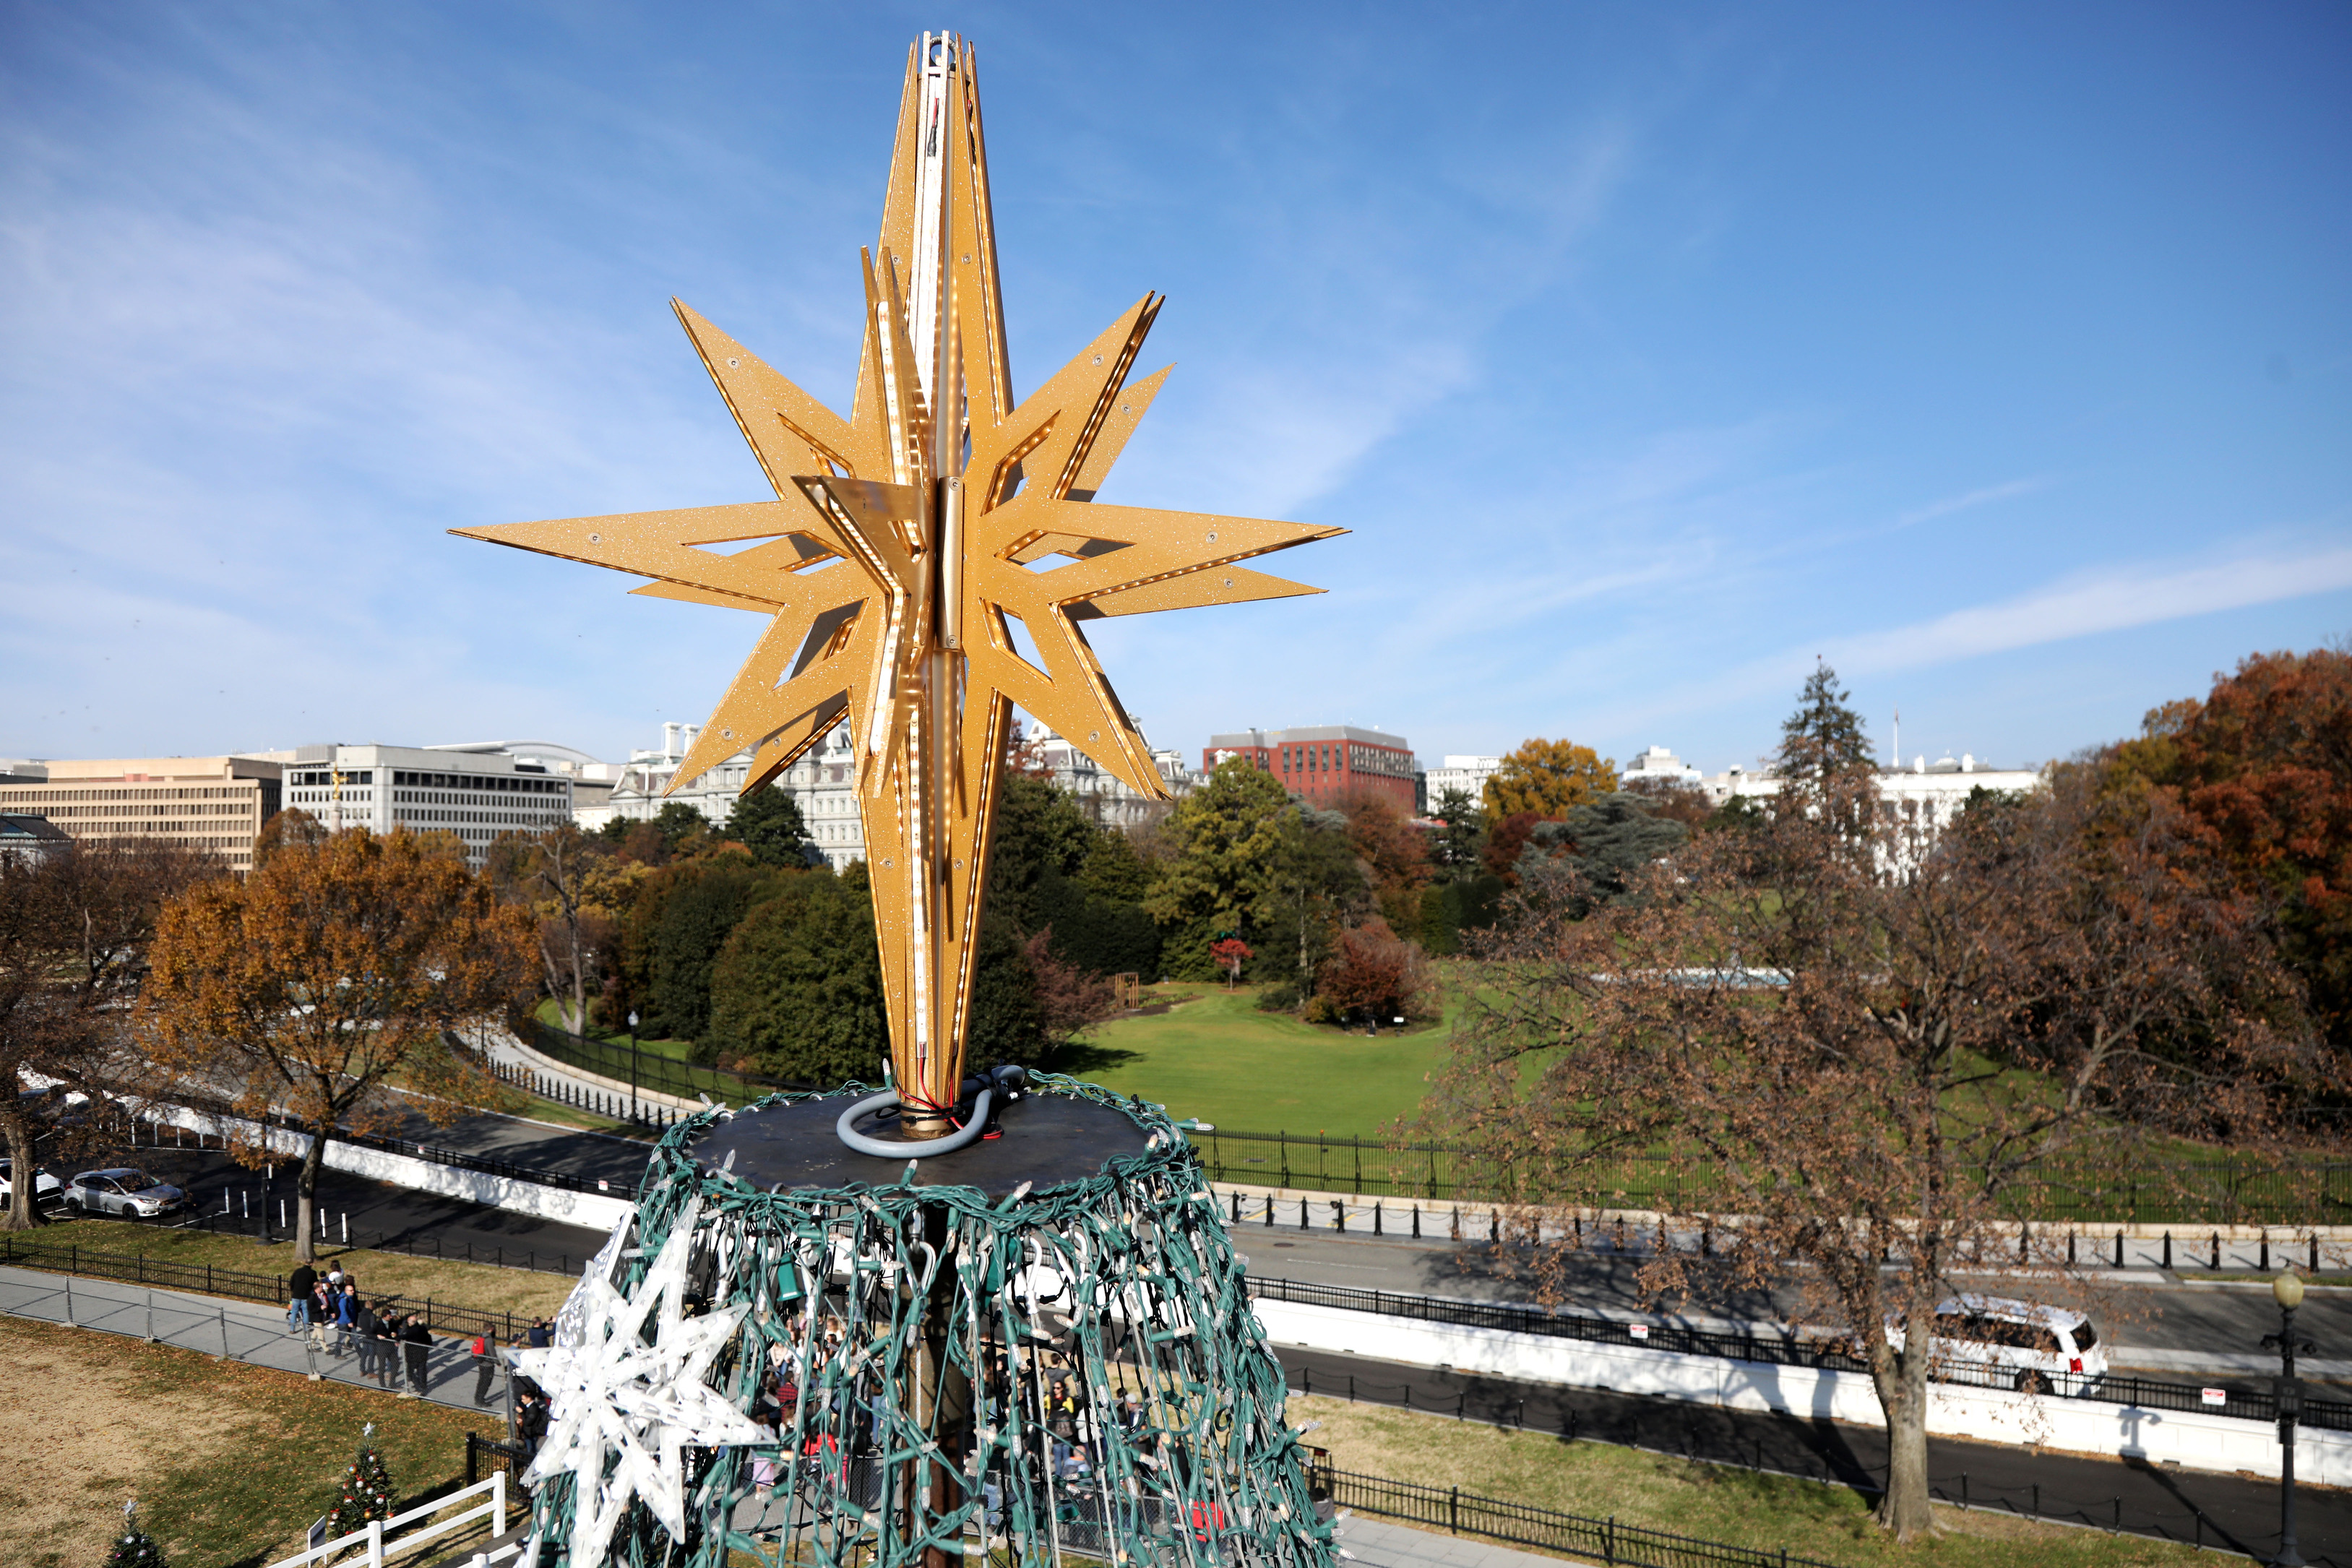 The star on top of the National Christmas Tree with the White House in the background